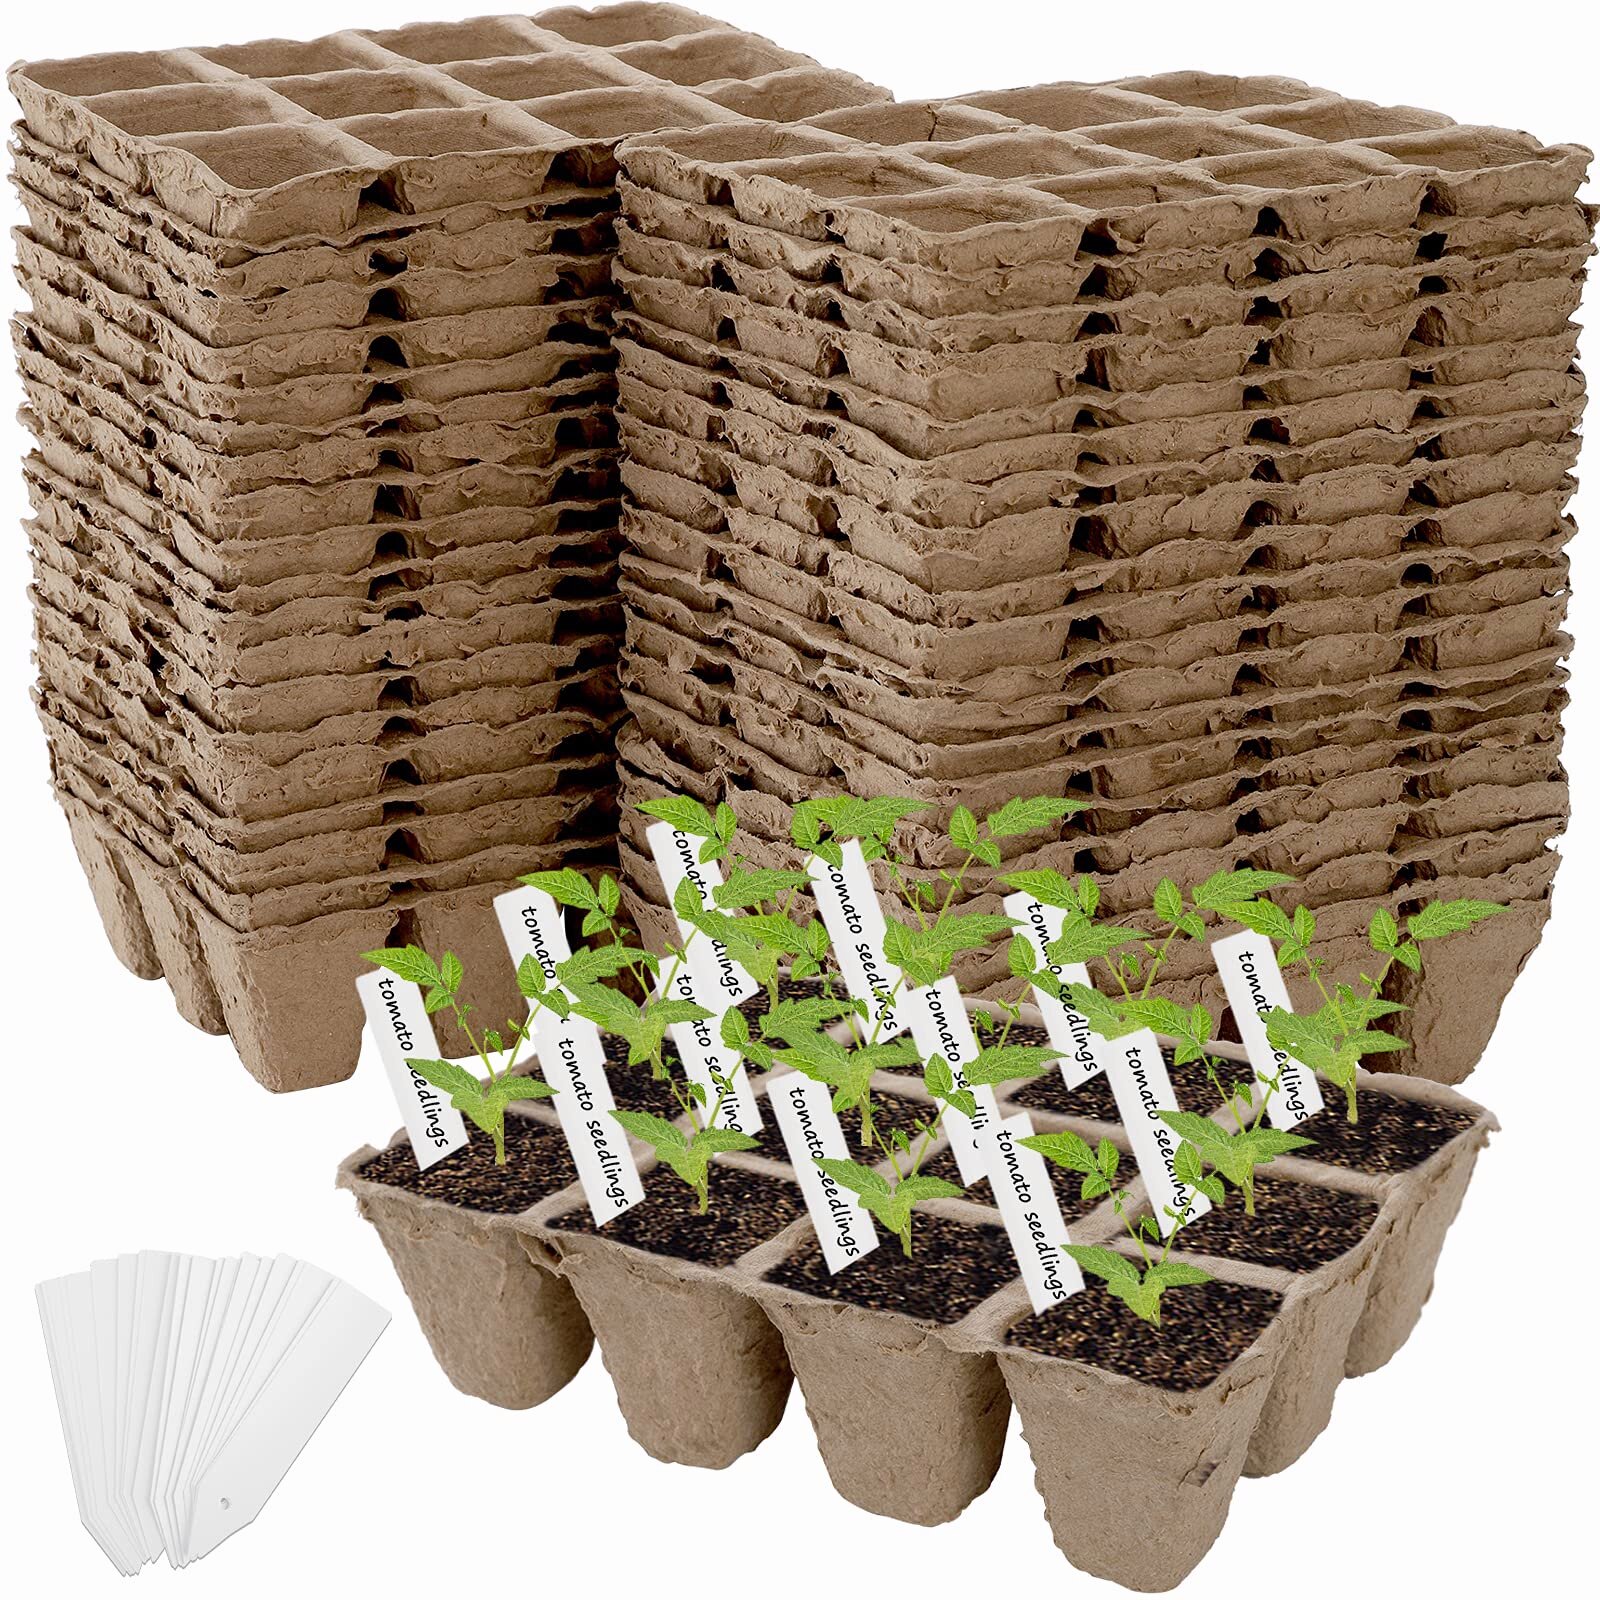 2.5 Biodegradable Seedling Germination Peat Pot with Bonus 100 Plant Markers Eco-Friendly Plantable Seedlings Pots for Garden Plants Sprouting Transplanting 36 Pack Coco Coir Planter Nursery Pots 